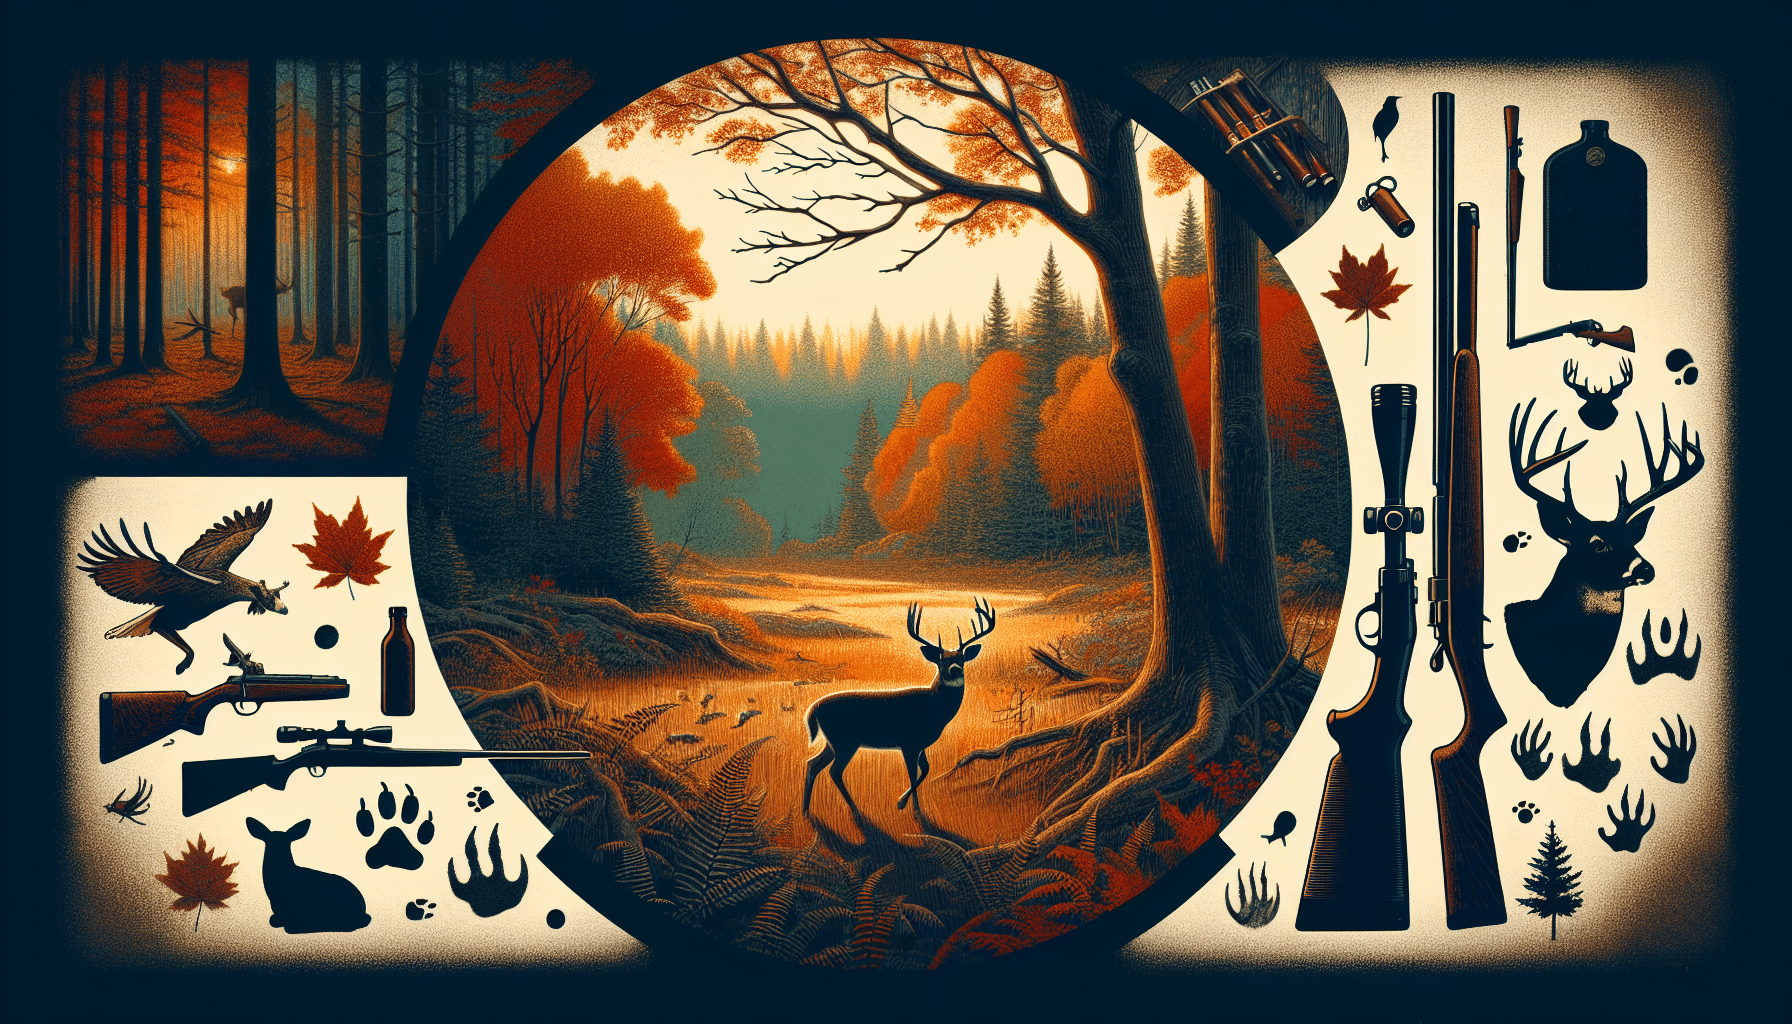 An illustrative image portraying the concept of deer hunting in Massachusetts, void of any human presence. Focus on quintessential elements such as woodland areas glowing with autumnal colors typical of the region, signifying the hunting season. Include a silhouette of a deer in a clear area, a hunting rifle leaning against a tree, and some scattered deer tracks on the ground. There should be no text or brands shown in the scene and no people represented. The image should convey the essence of a serene, undeveloped natural landscape during the hunting season.